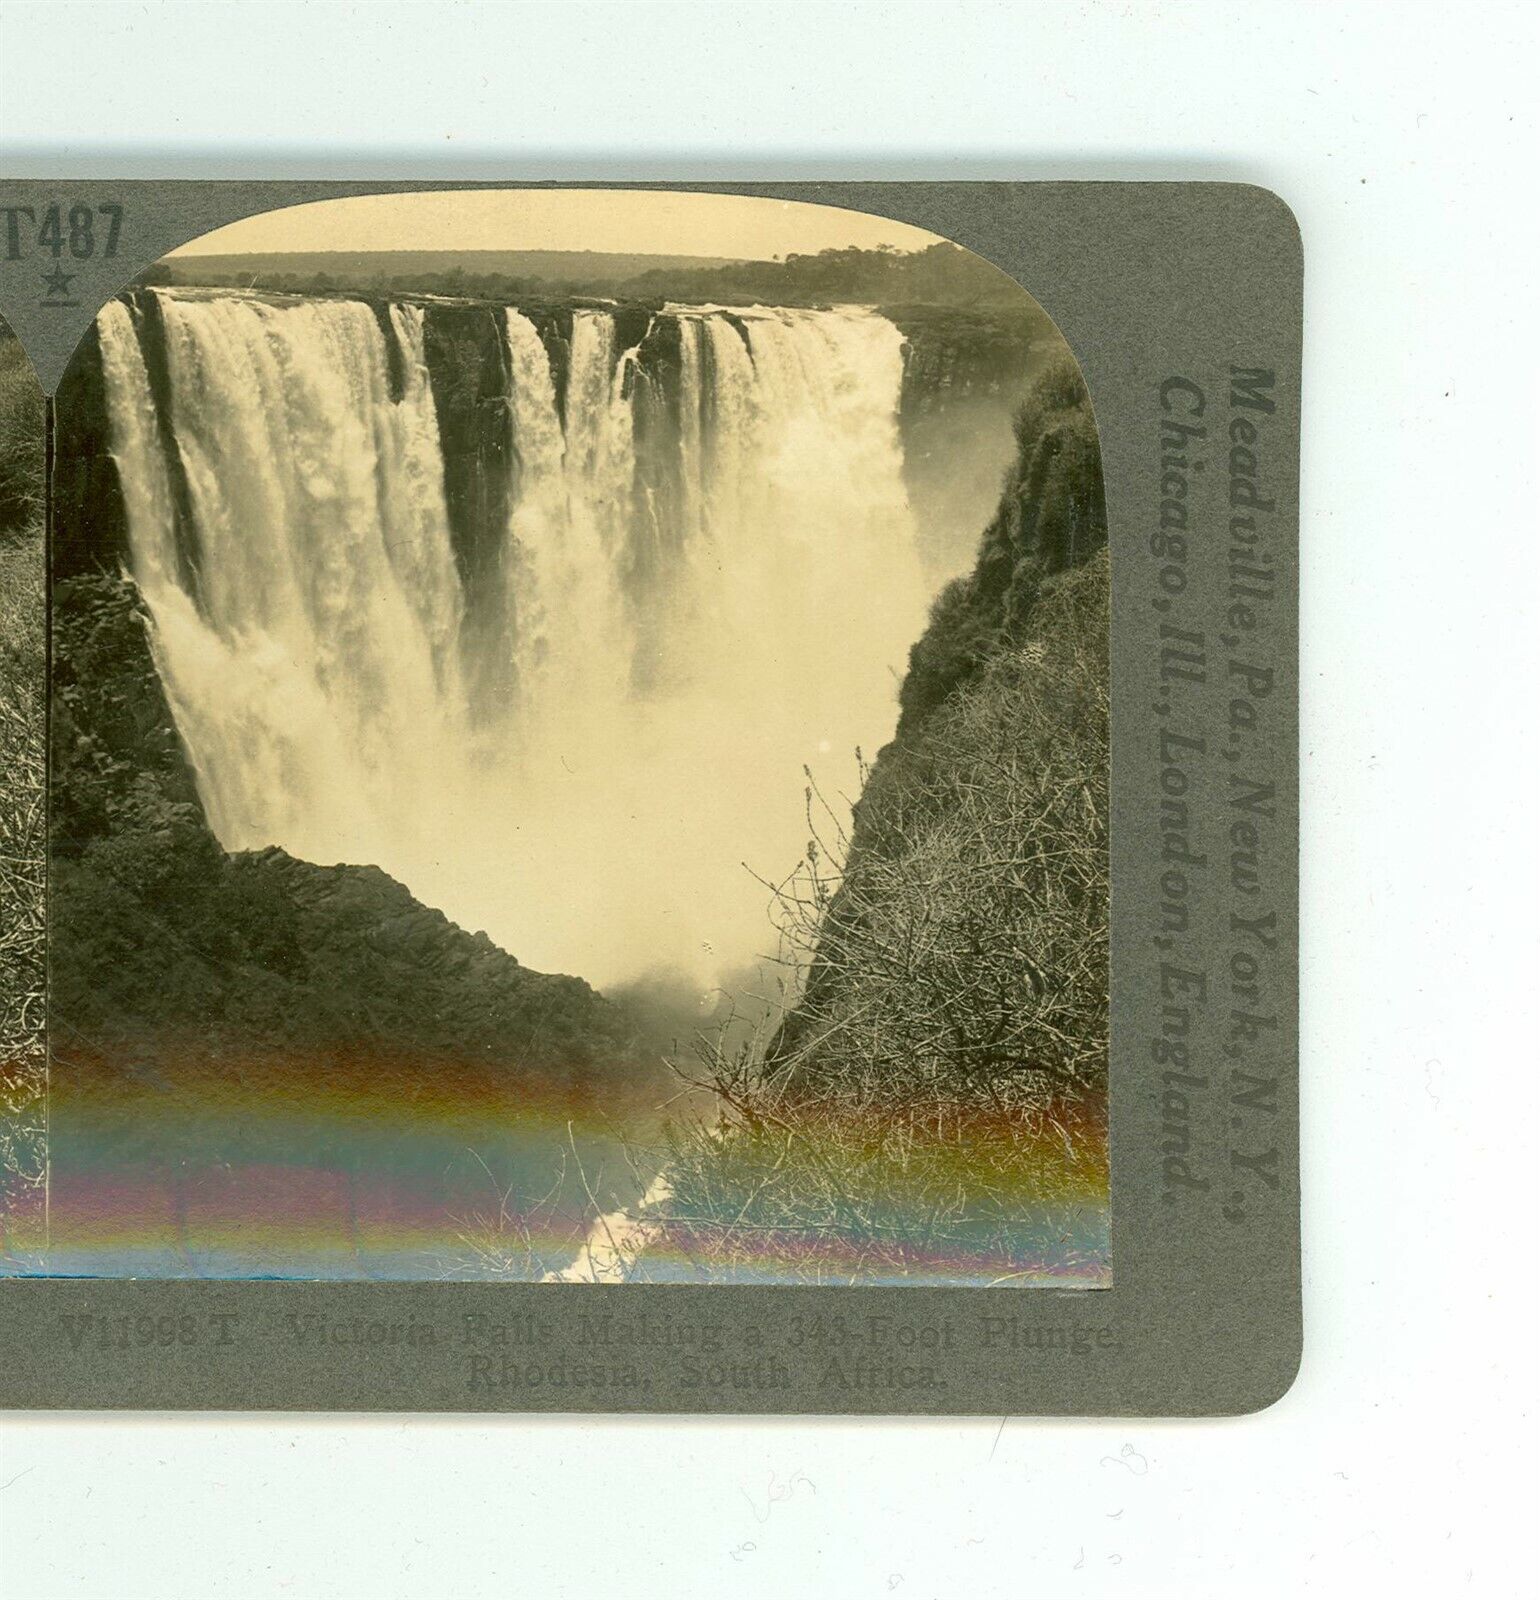 B7557 Victoria Falls Making A 343 Foot Plunge, Rhodesia, South Africa D